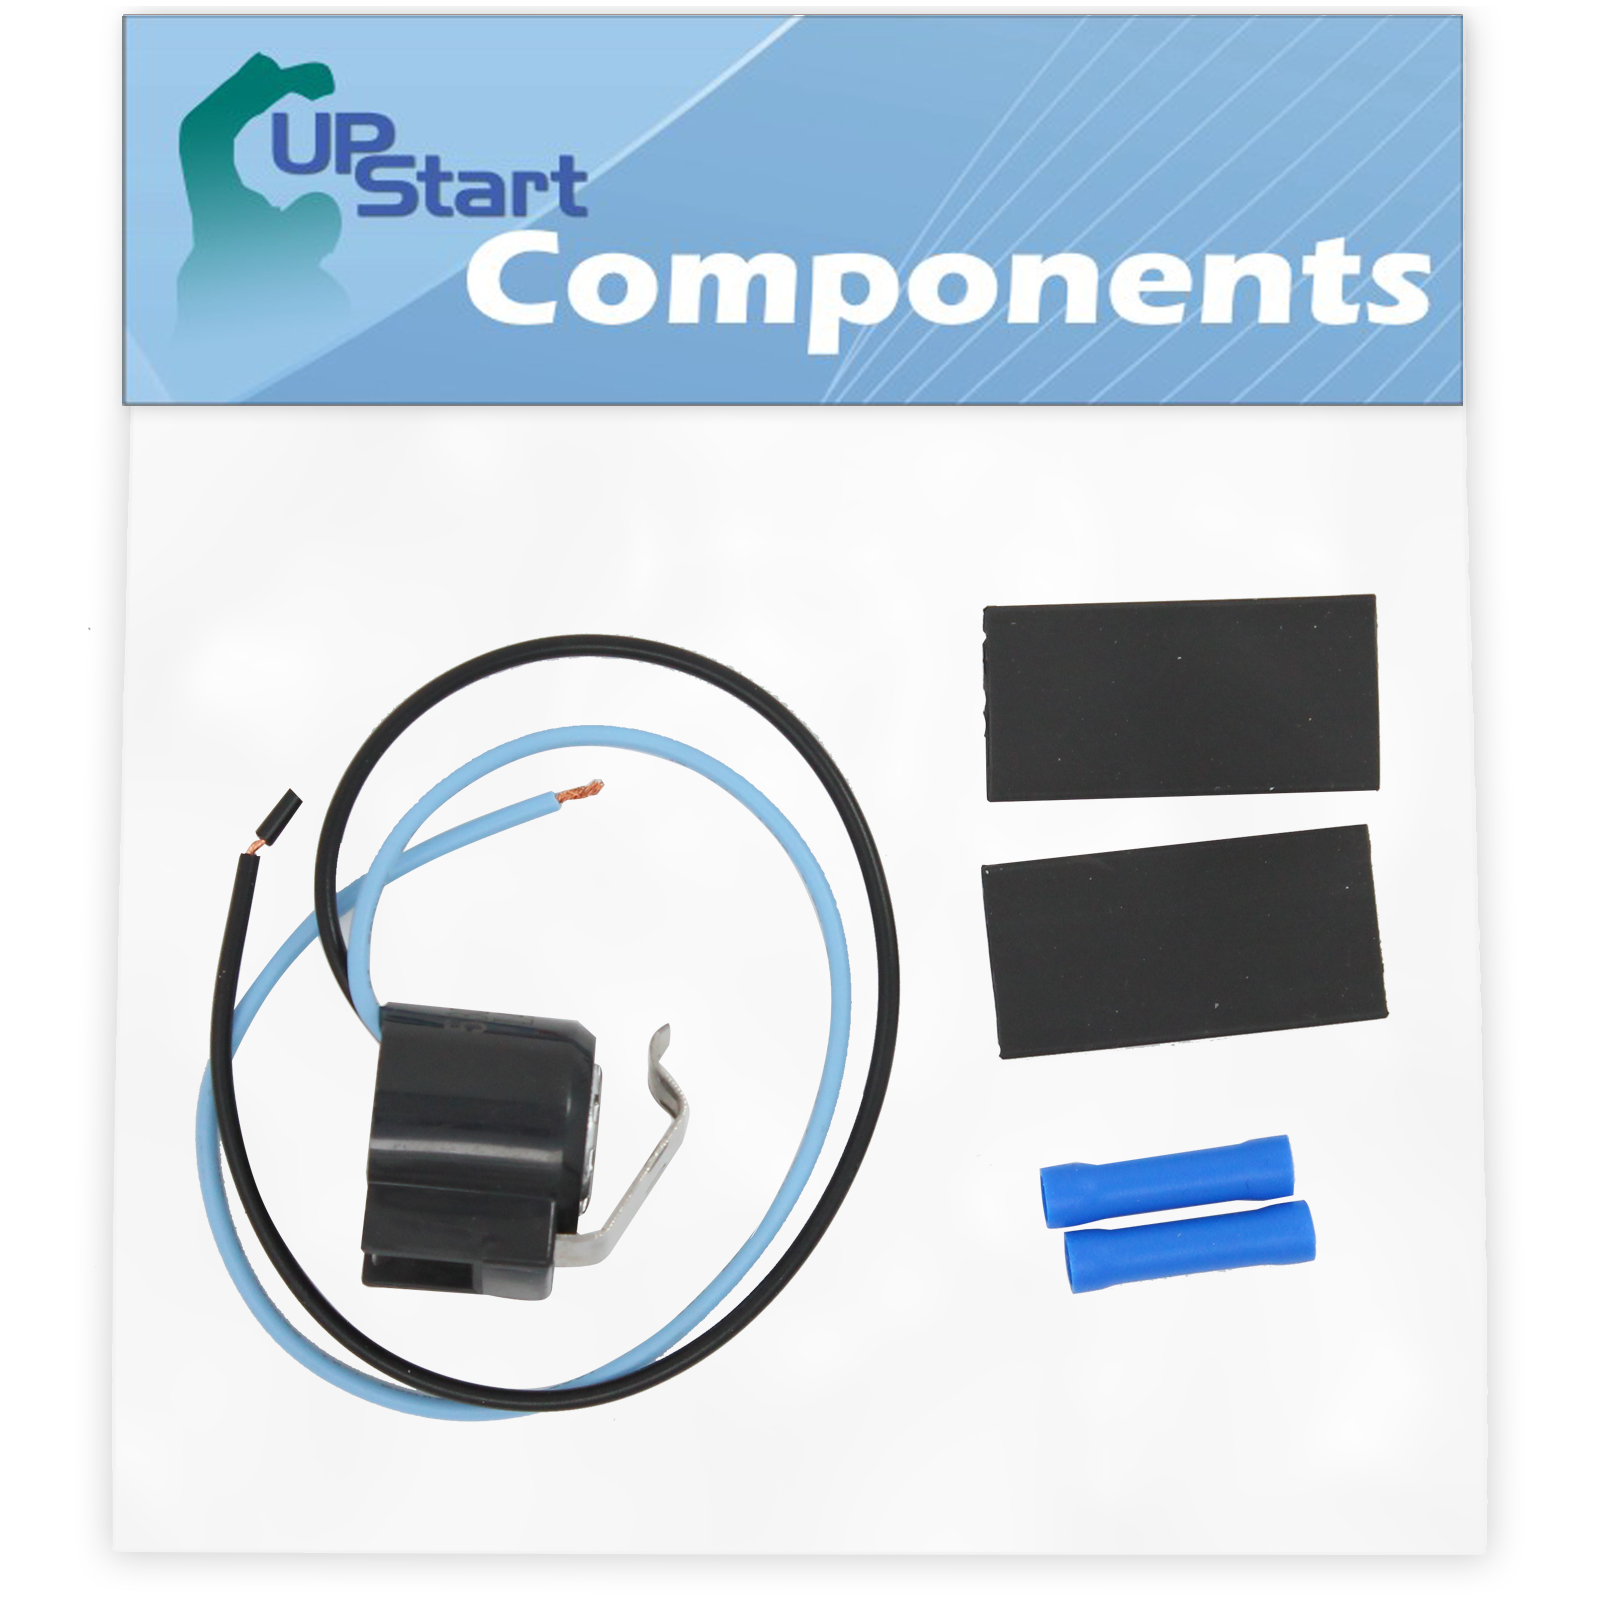 5303918214 Defrost Thermostat Replacement for Frigidaire DFHS2313MF7 Refrigerator - Compatible with 5303918214 Defrost Thermostat Kit - UpStart Components Brand - image 1 of 2